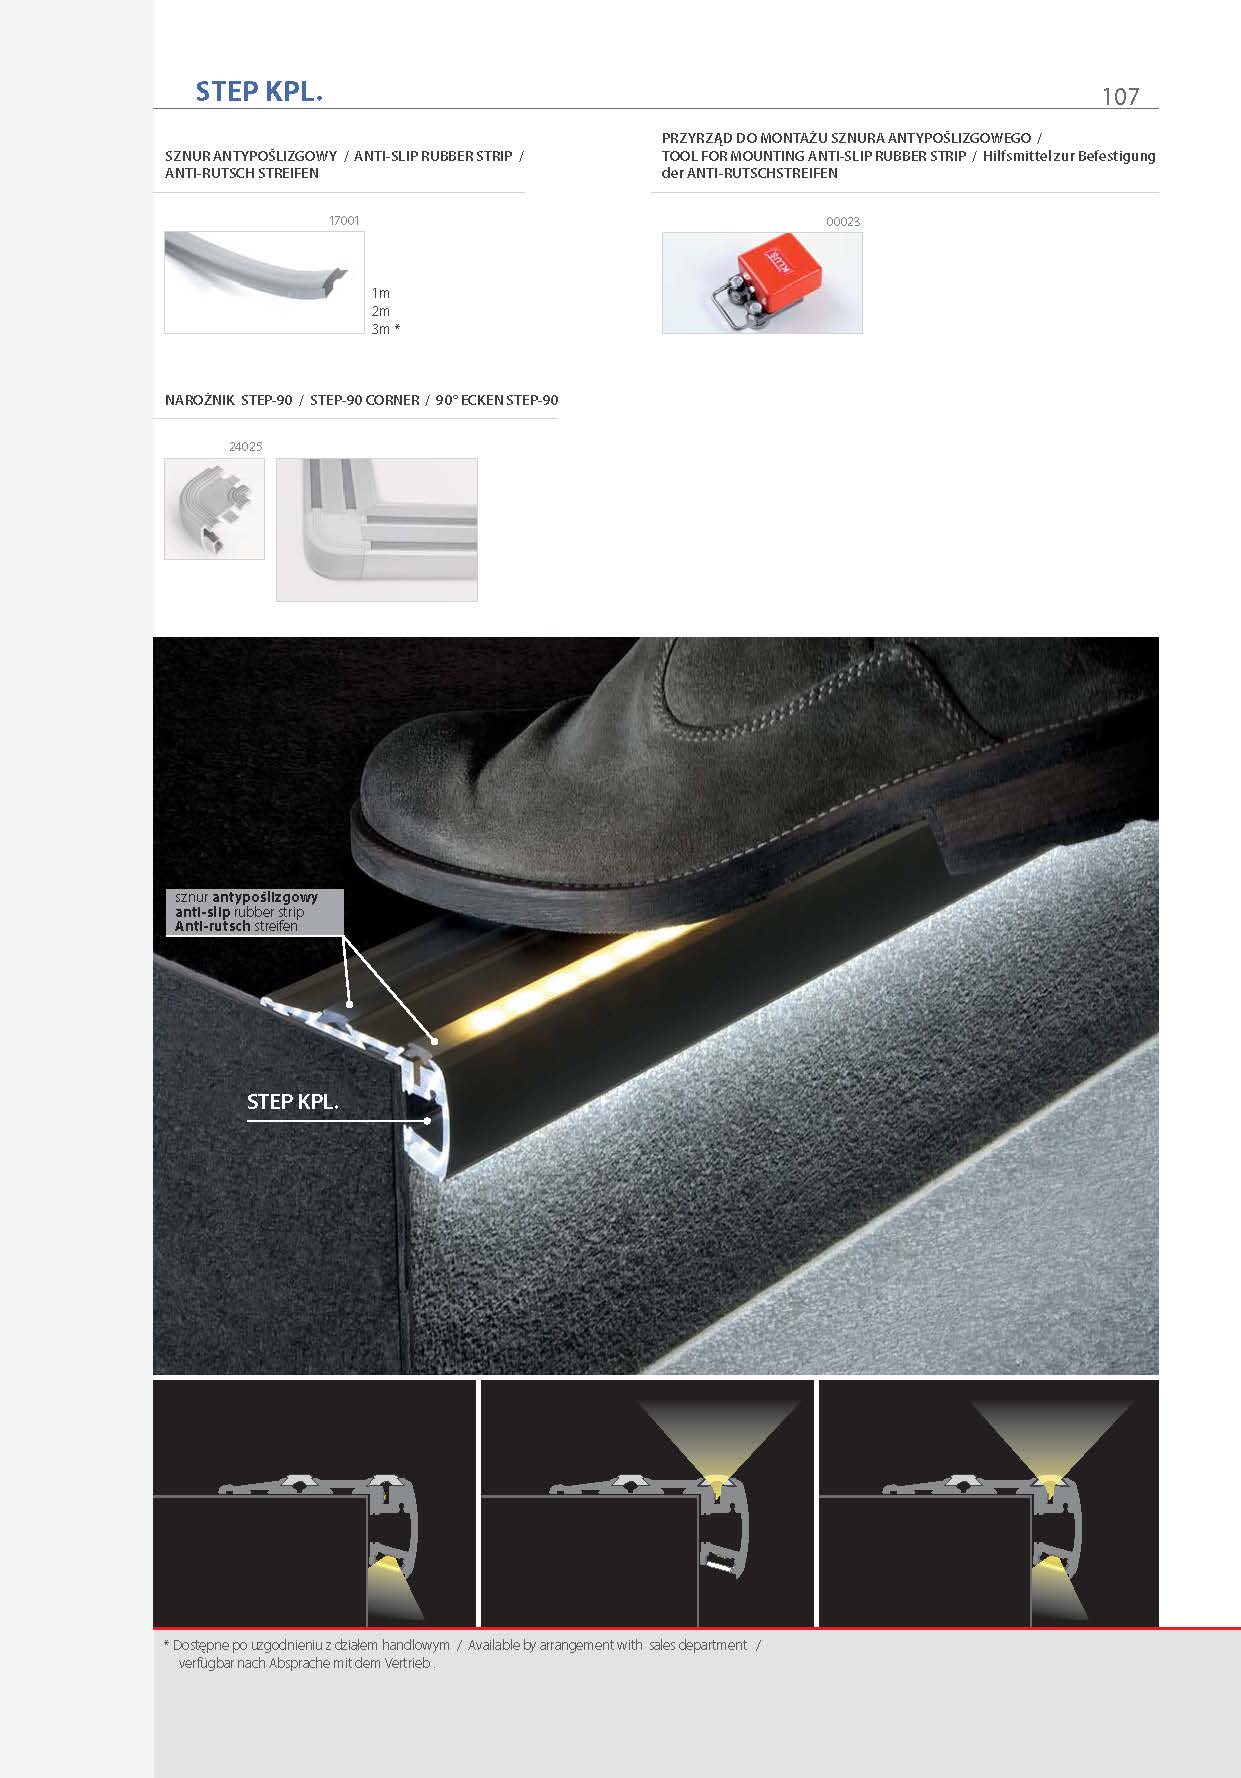 profil step, profil schodowy, profil schodowy led, led profiles for stairs, stairs profile, treppen profile, led treppen profile